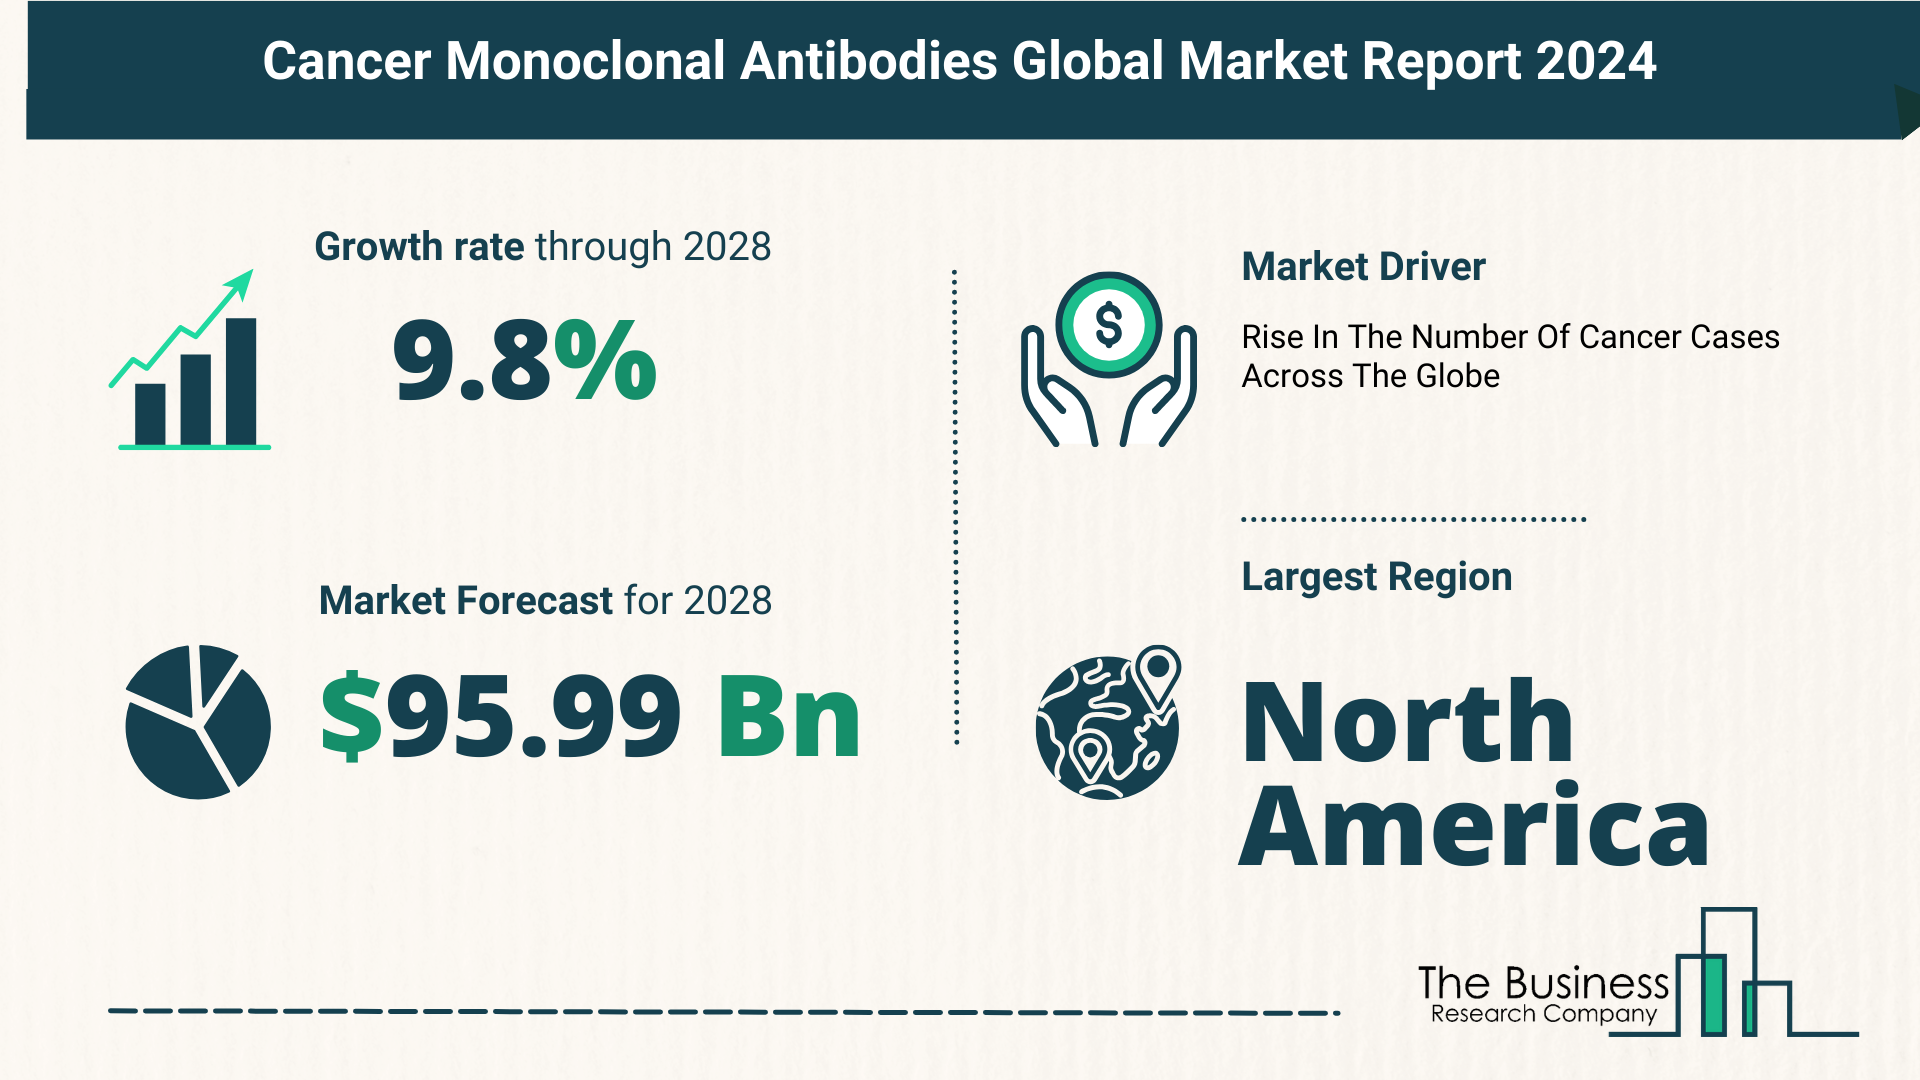 Cancer Monoclonal Antibodies Market Growth Analysis Till 2033 By The Business Research Company